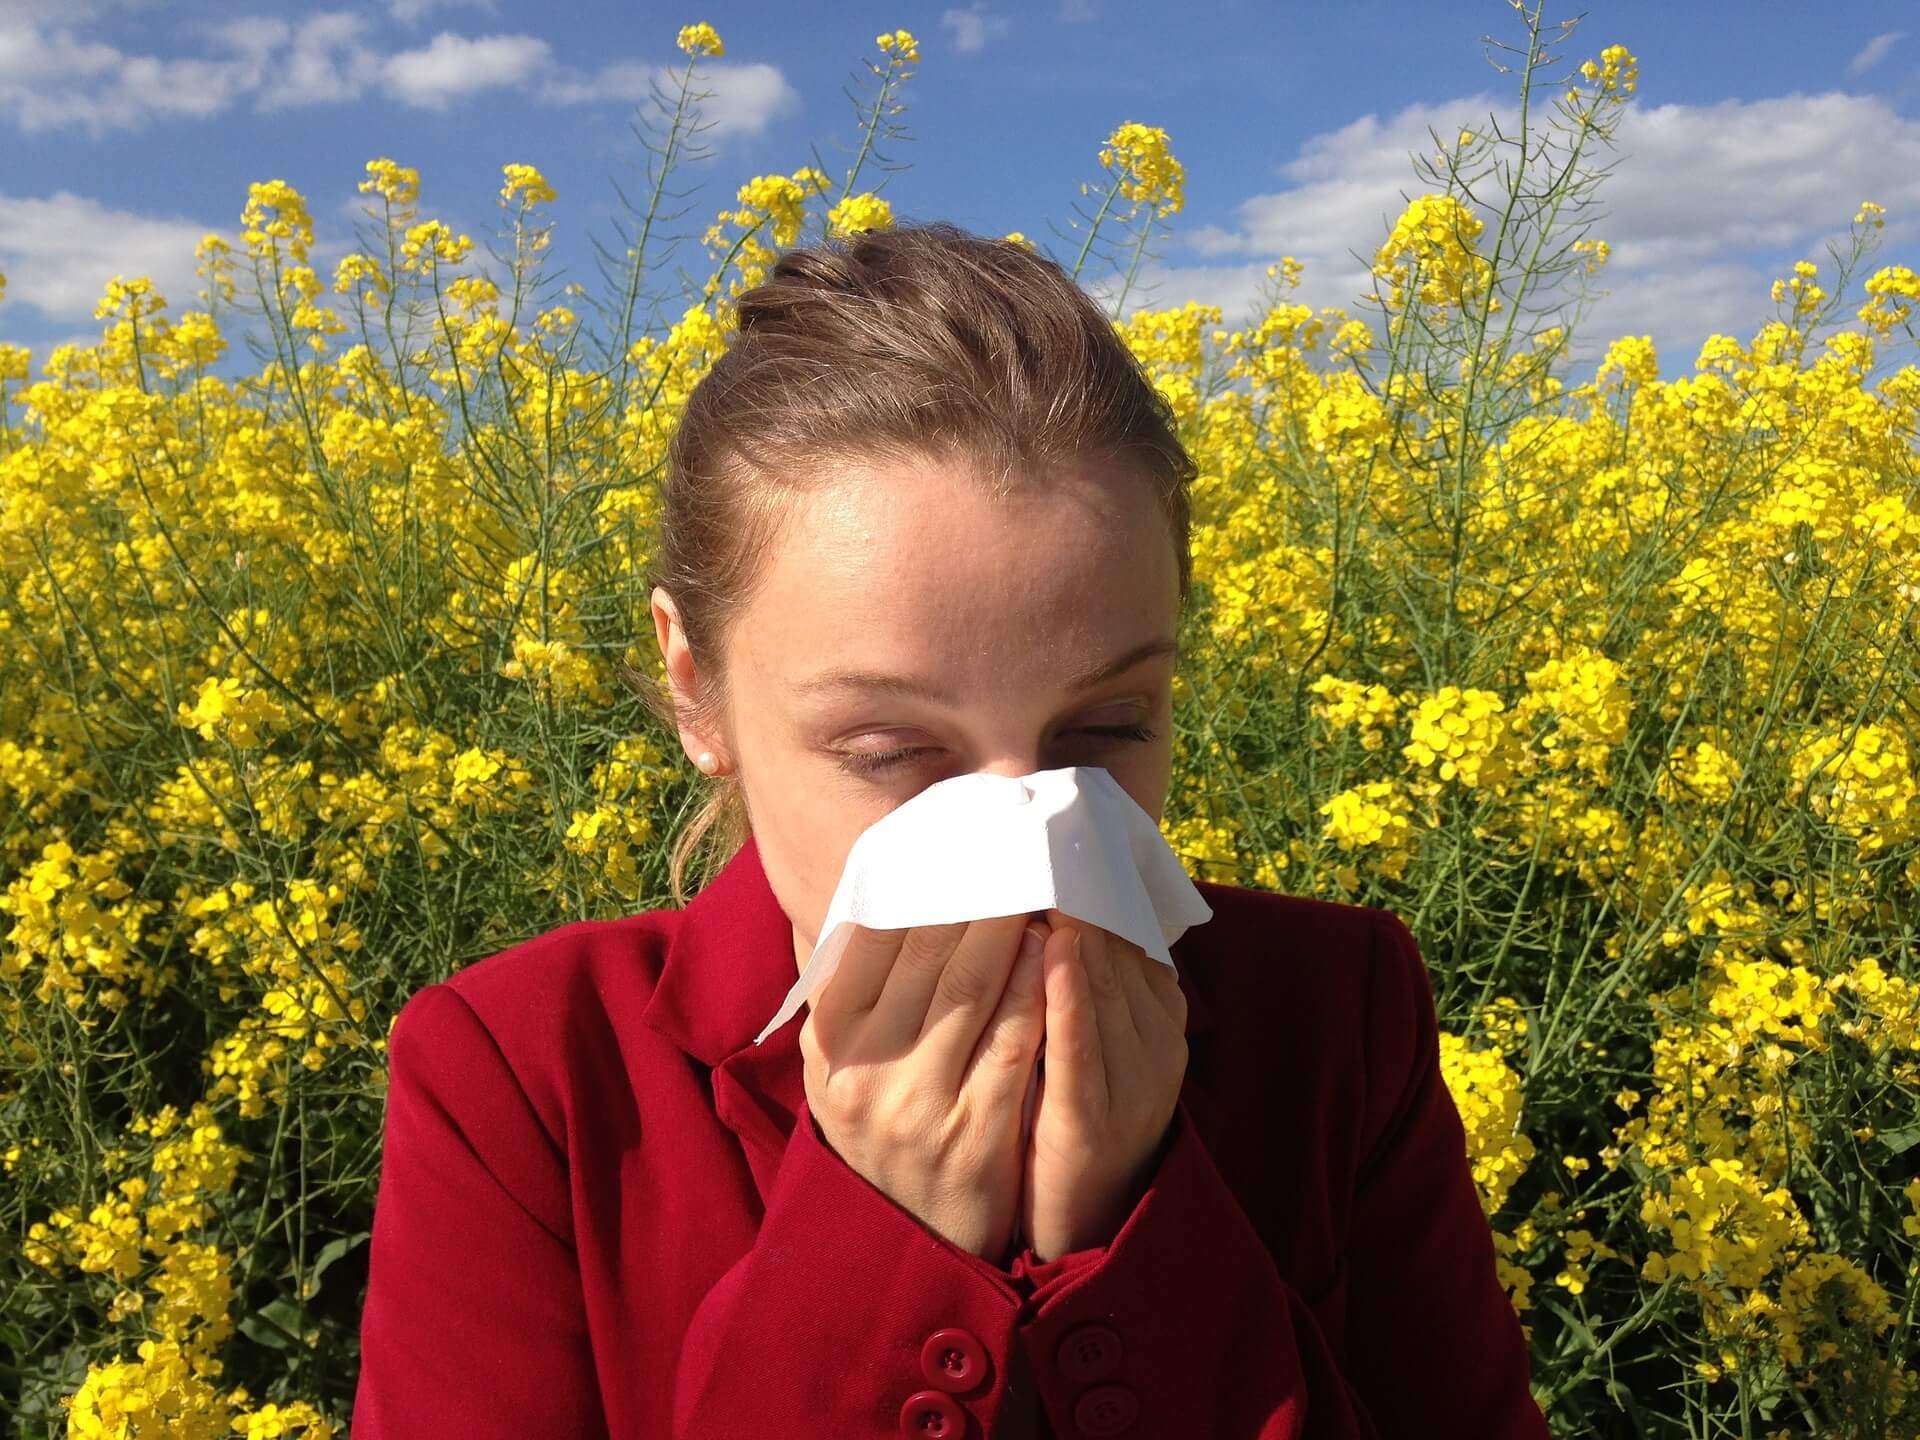 New Yorkers, The Worst Allergy Season Is Among Us